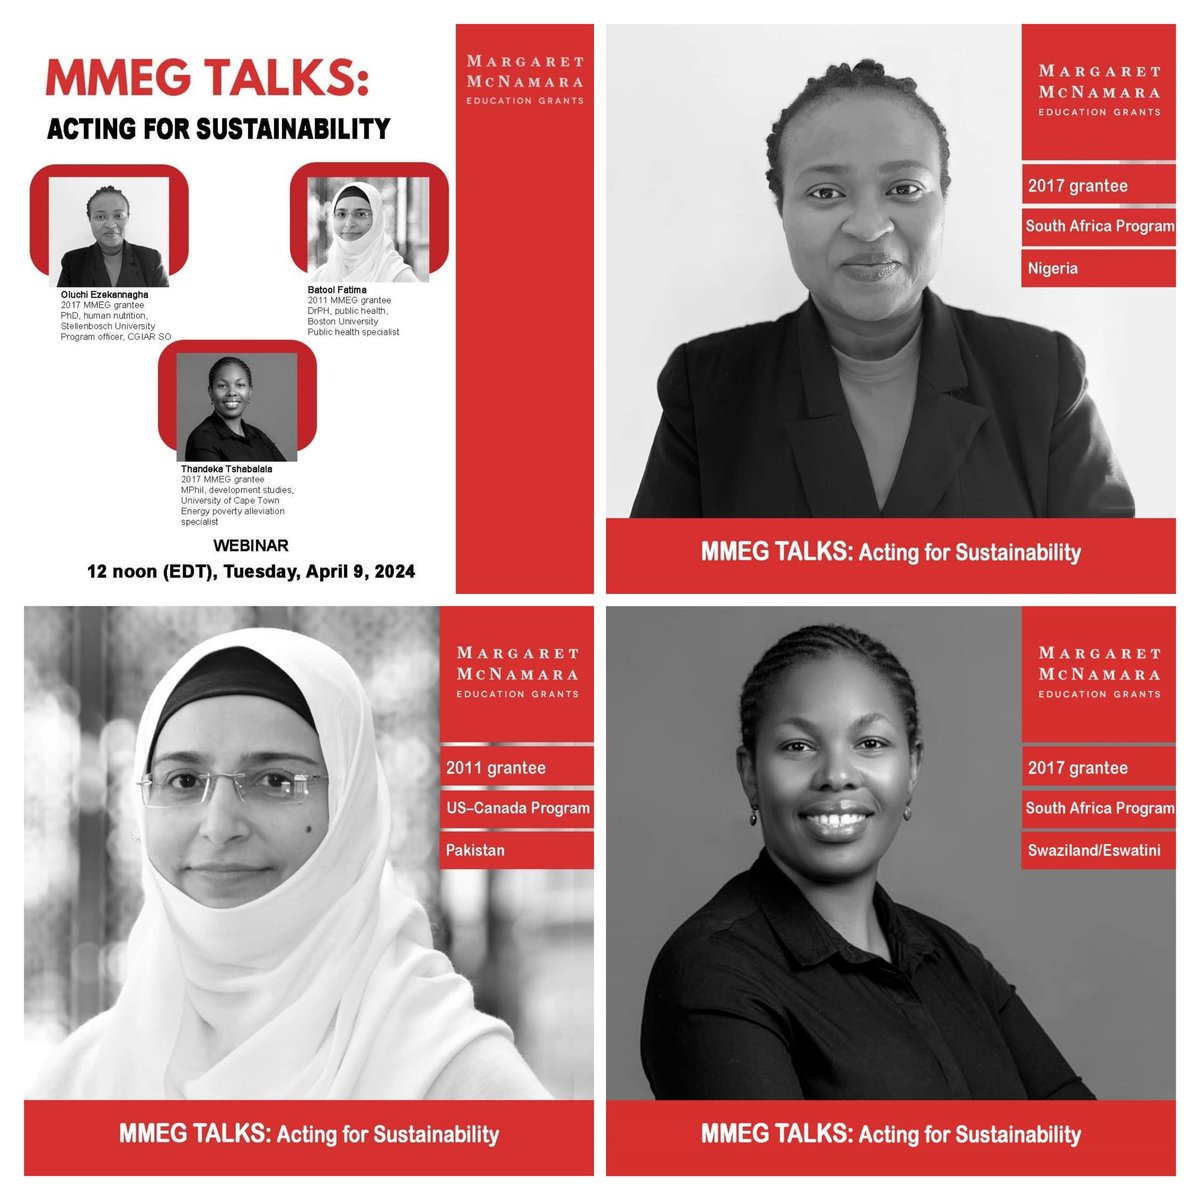 TOMORROW, Tuesday, April 9, 12 noon (EDT)

How can sustainable practices in nutrition, health, and urban planning improve the lives of women and children?

Find out during our webinar: mmeg.org/events

#mmegtalks #sustainability #sustainablenutrition #sustainablehealth